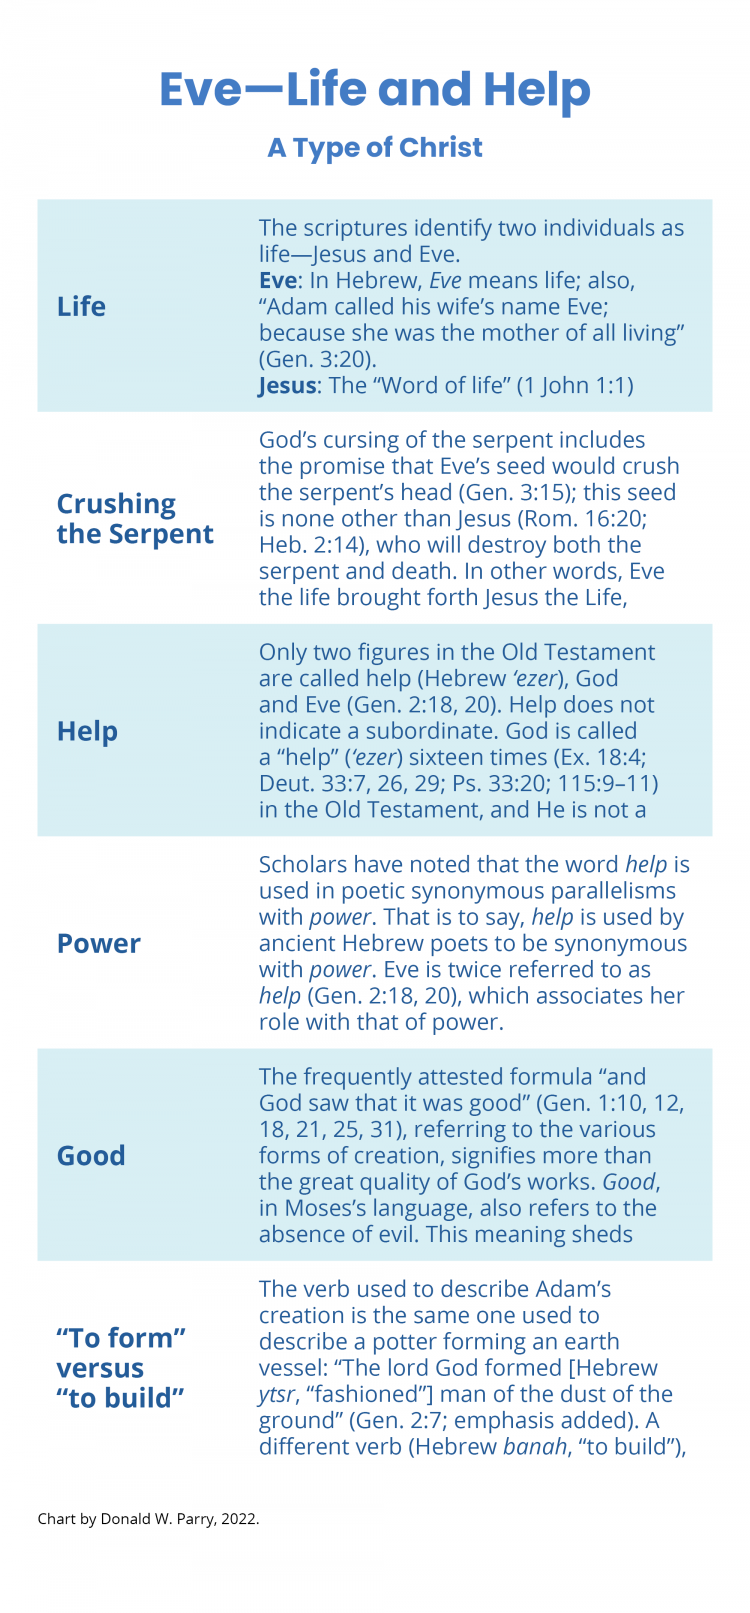 Chart by Donald W. Parry. Eve: Life and Help: A Type of Christ.